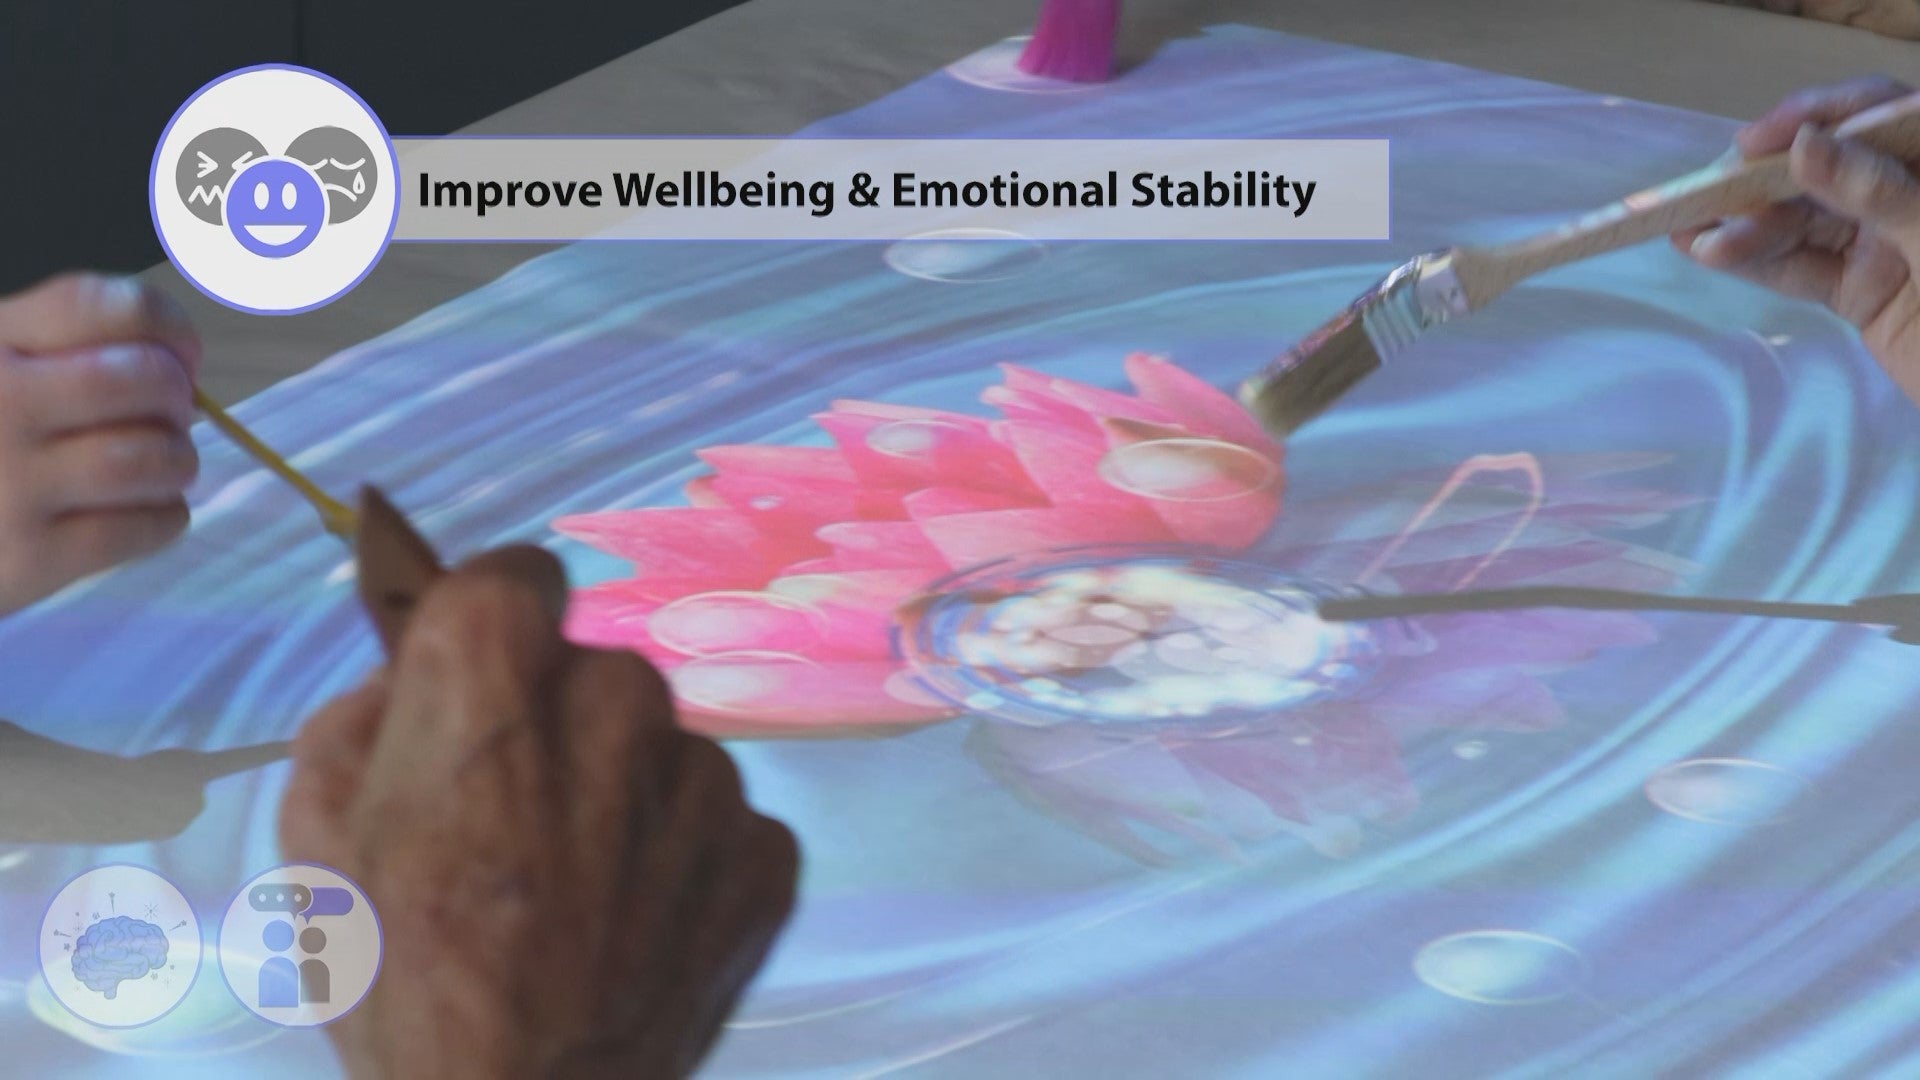 The Wellbeing Suite Painting